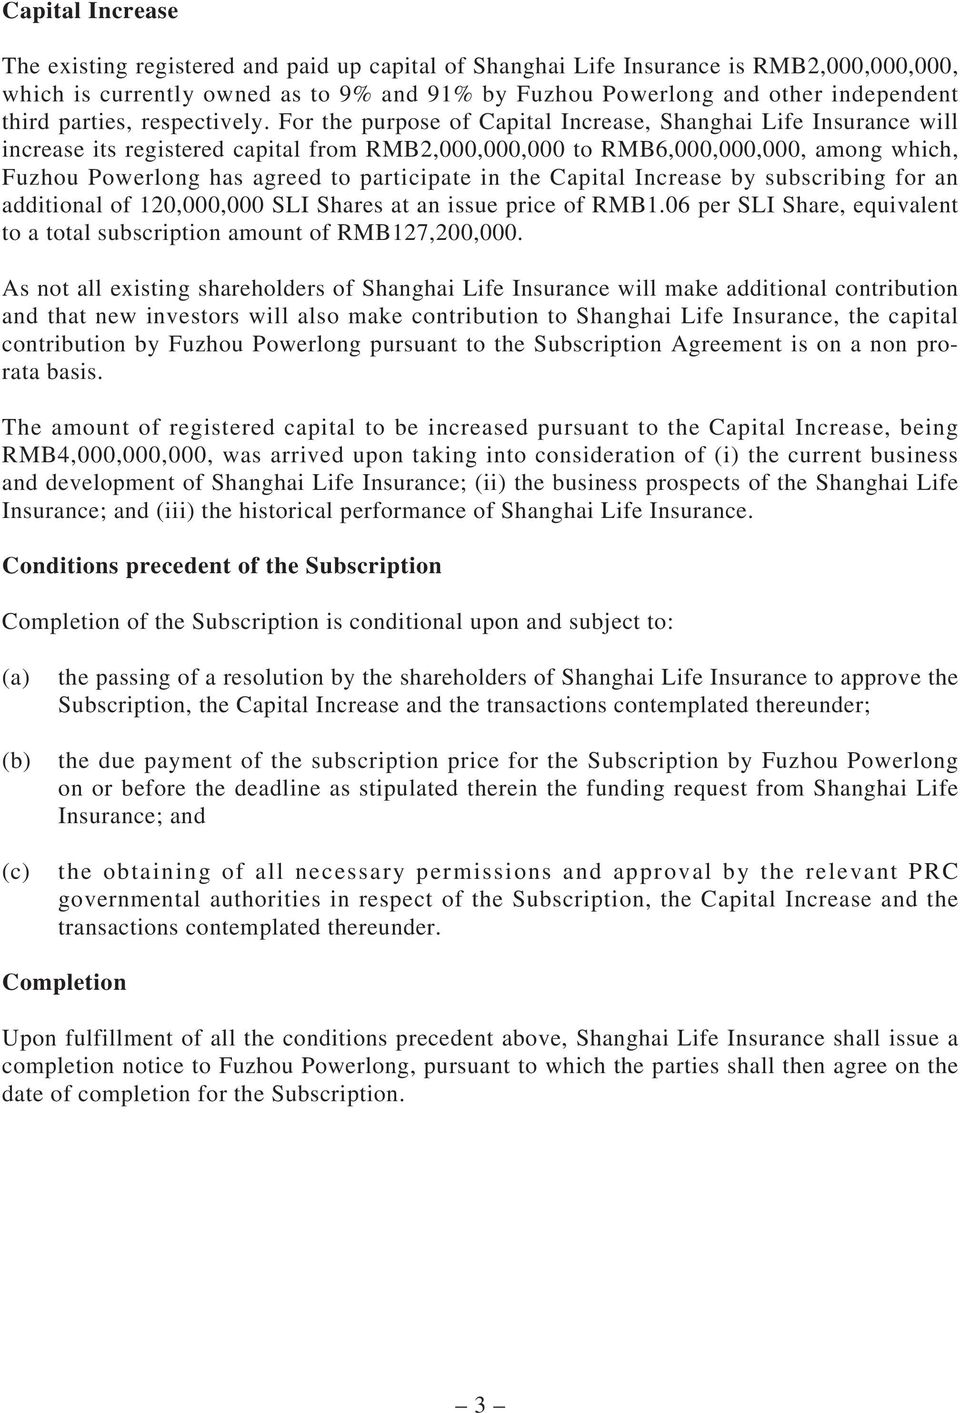 For the purpose of Capital Increase, Shanghai Life Insurance will increase its registered capital from RMB2,000,000,000 to RMB6,000,000,000, among which, Fuzhou Powerlong has agreed to participate in